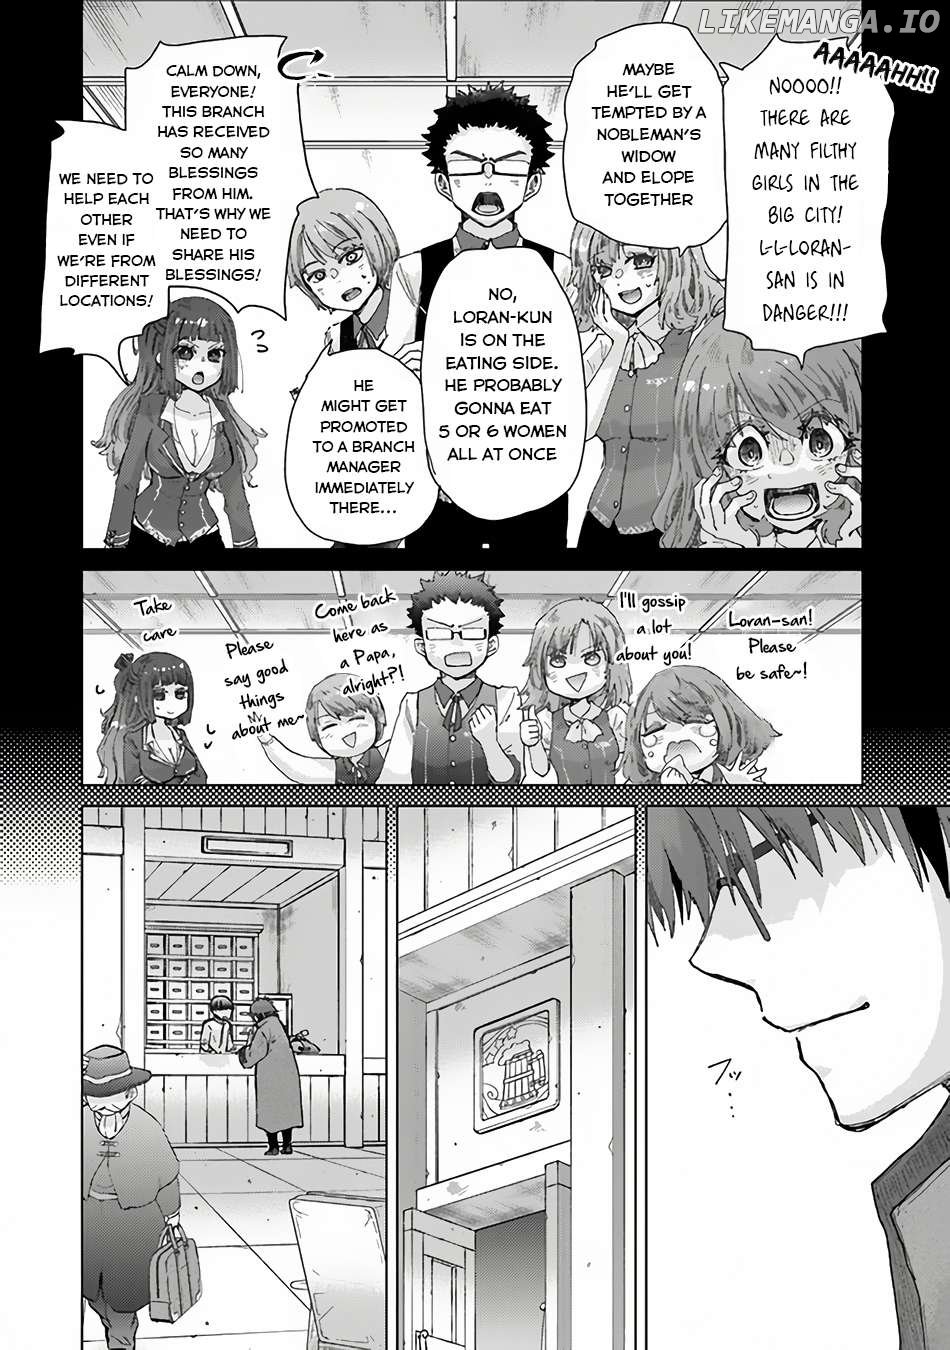 The Guild Official With The Out-of-the-Way Skill “Shadowy” Is, In Fact, The Legendary Assassin Chapter 35 - page 7